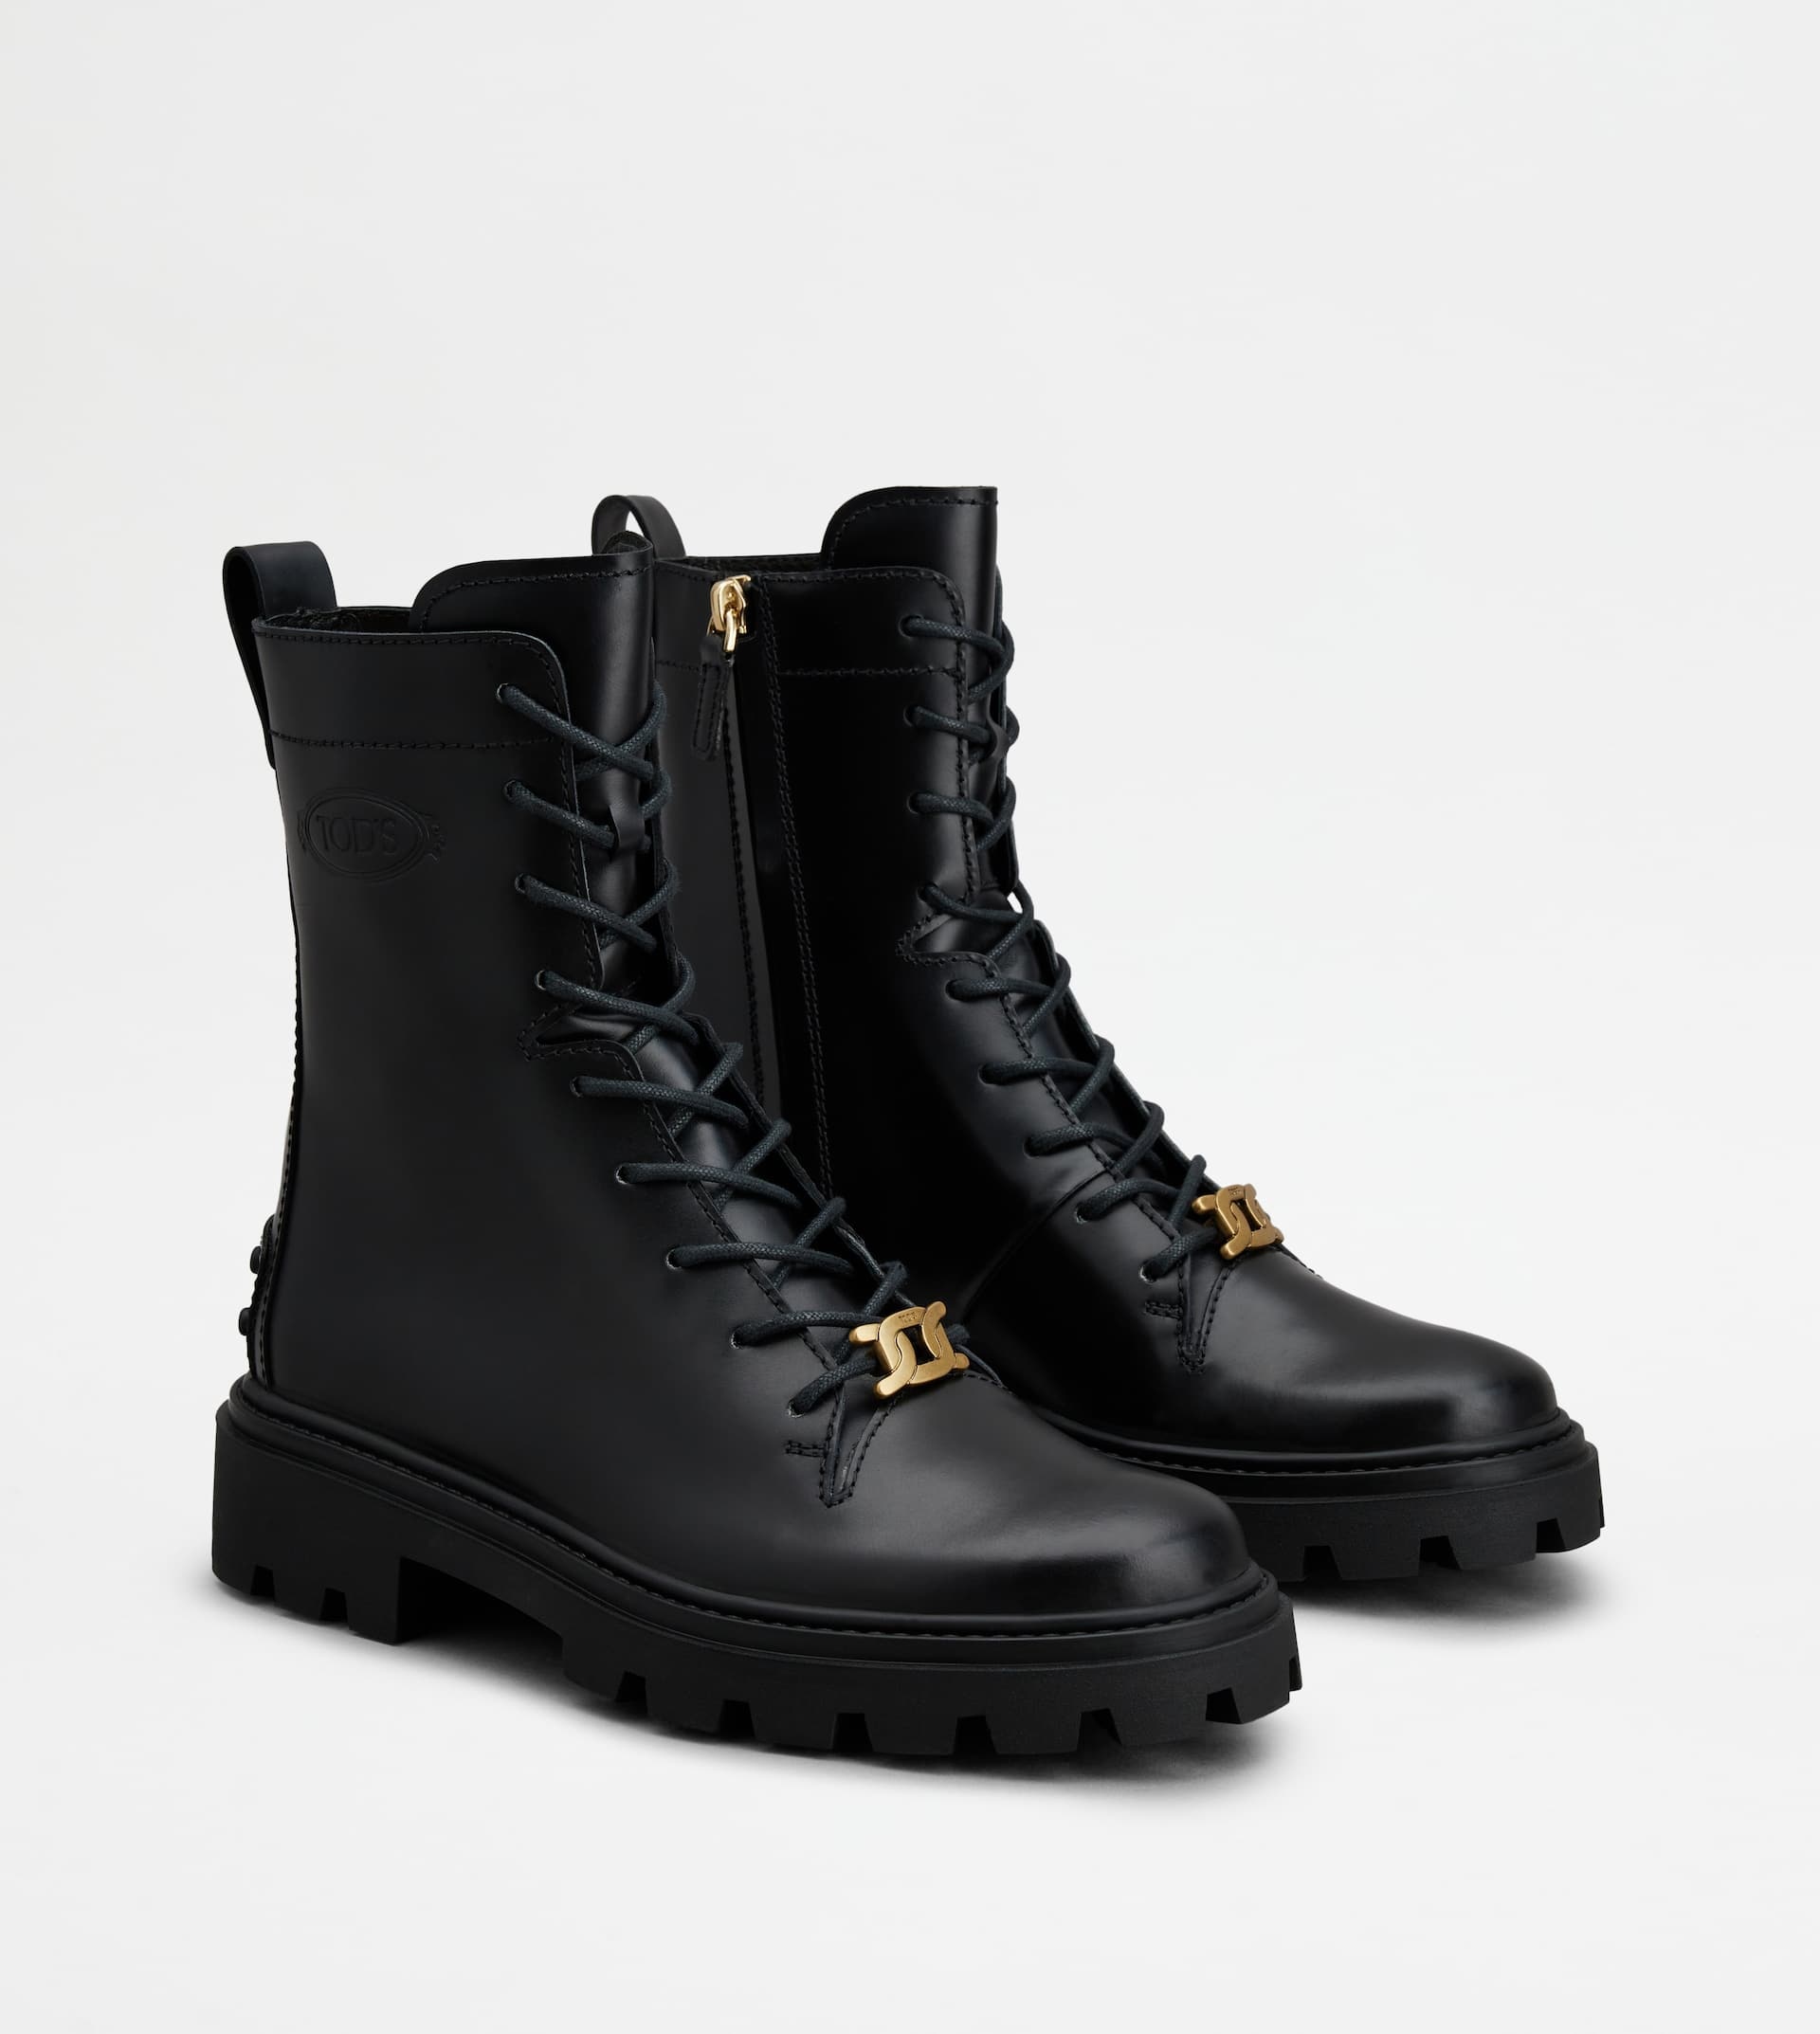 COMBAT BOOTS IN LEATHER - BLACK - 3